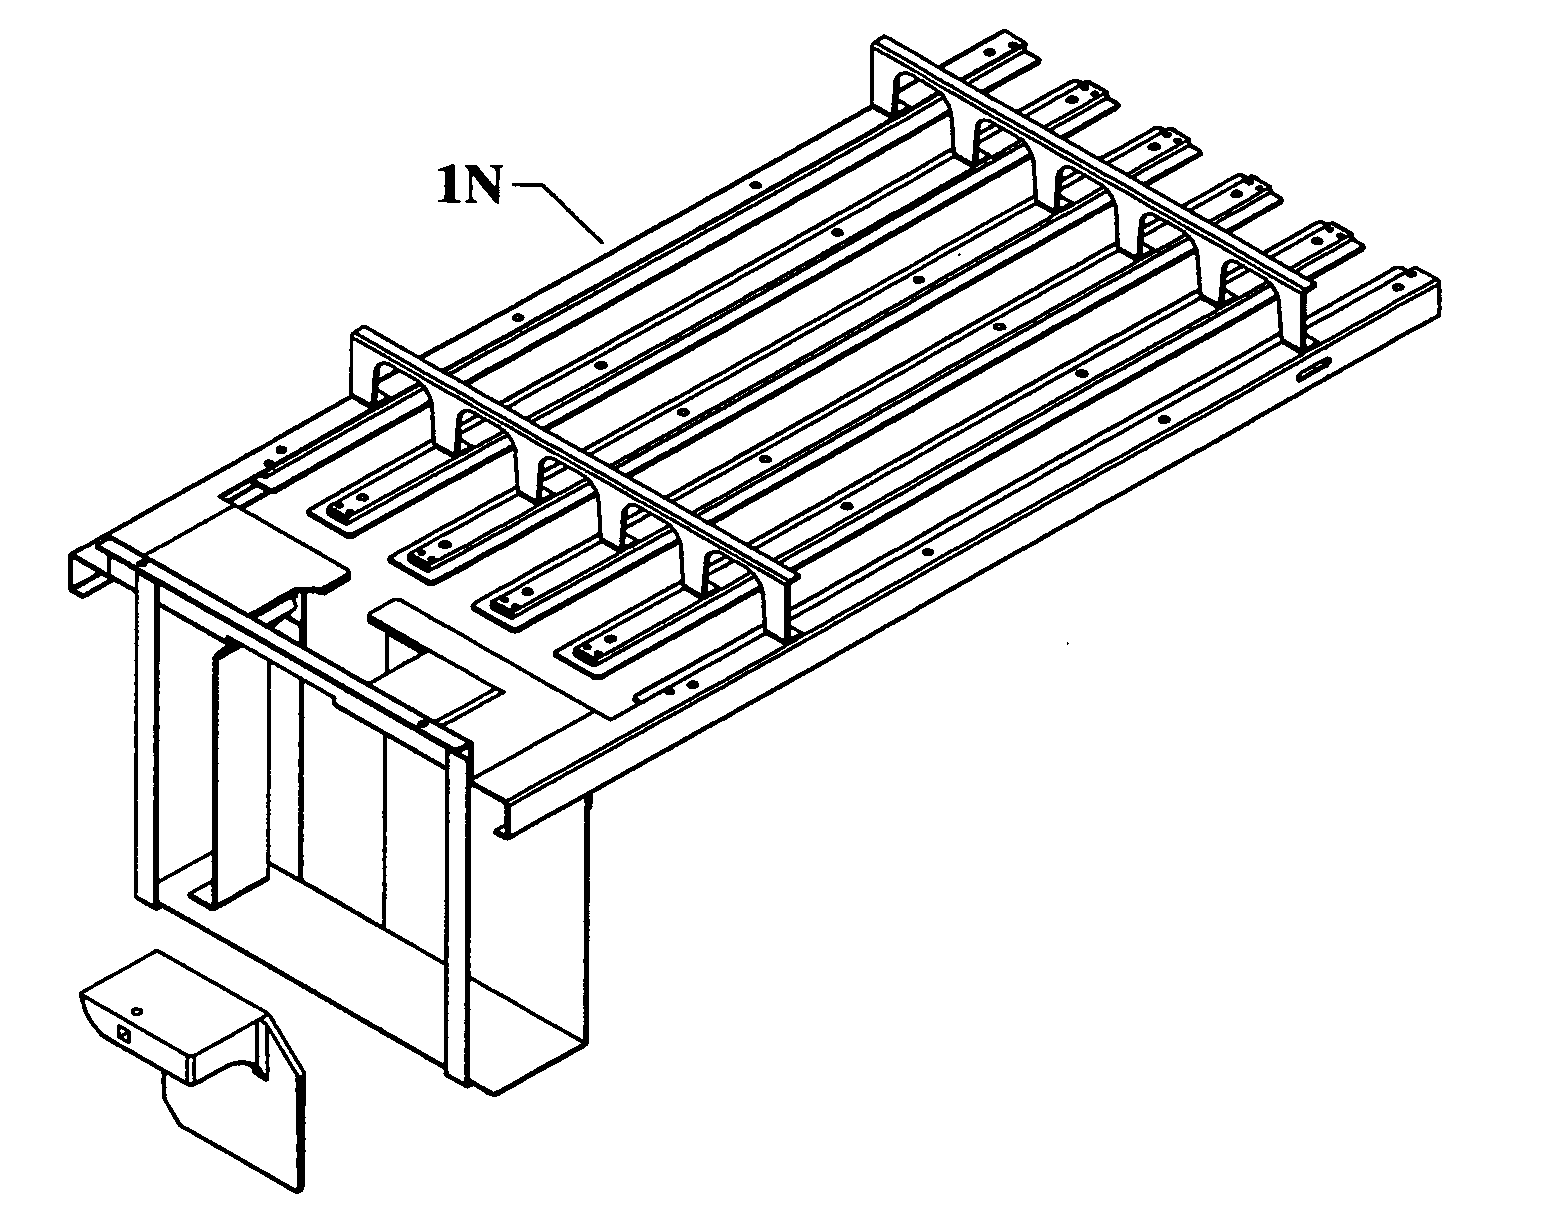 Interchangeable and changeable slider blade dispensing apparatus with adjustable saw tooth trough tray